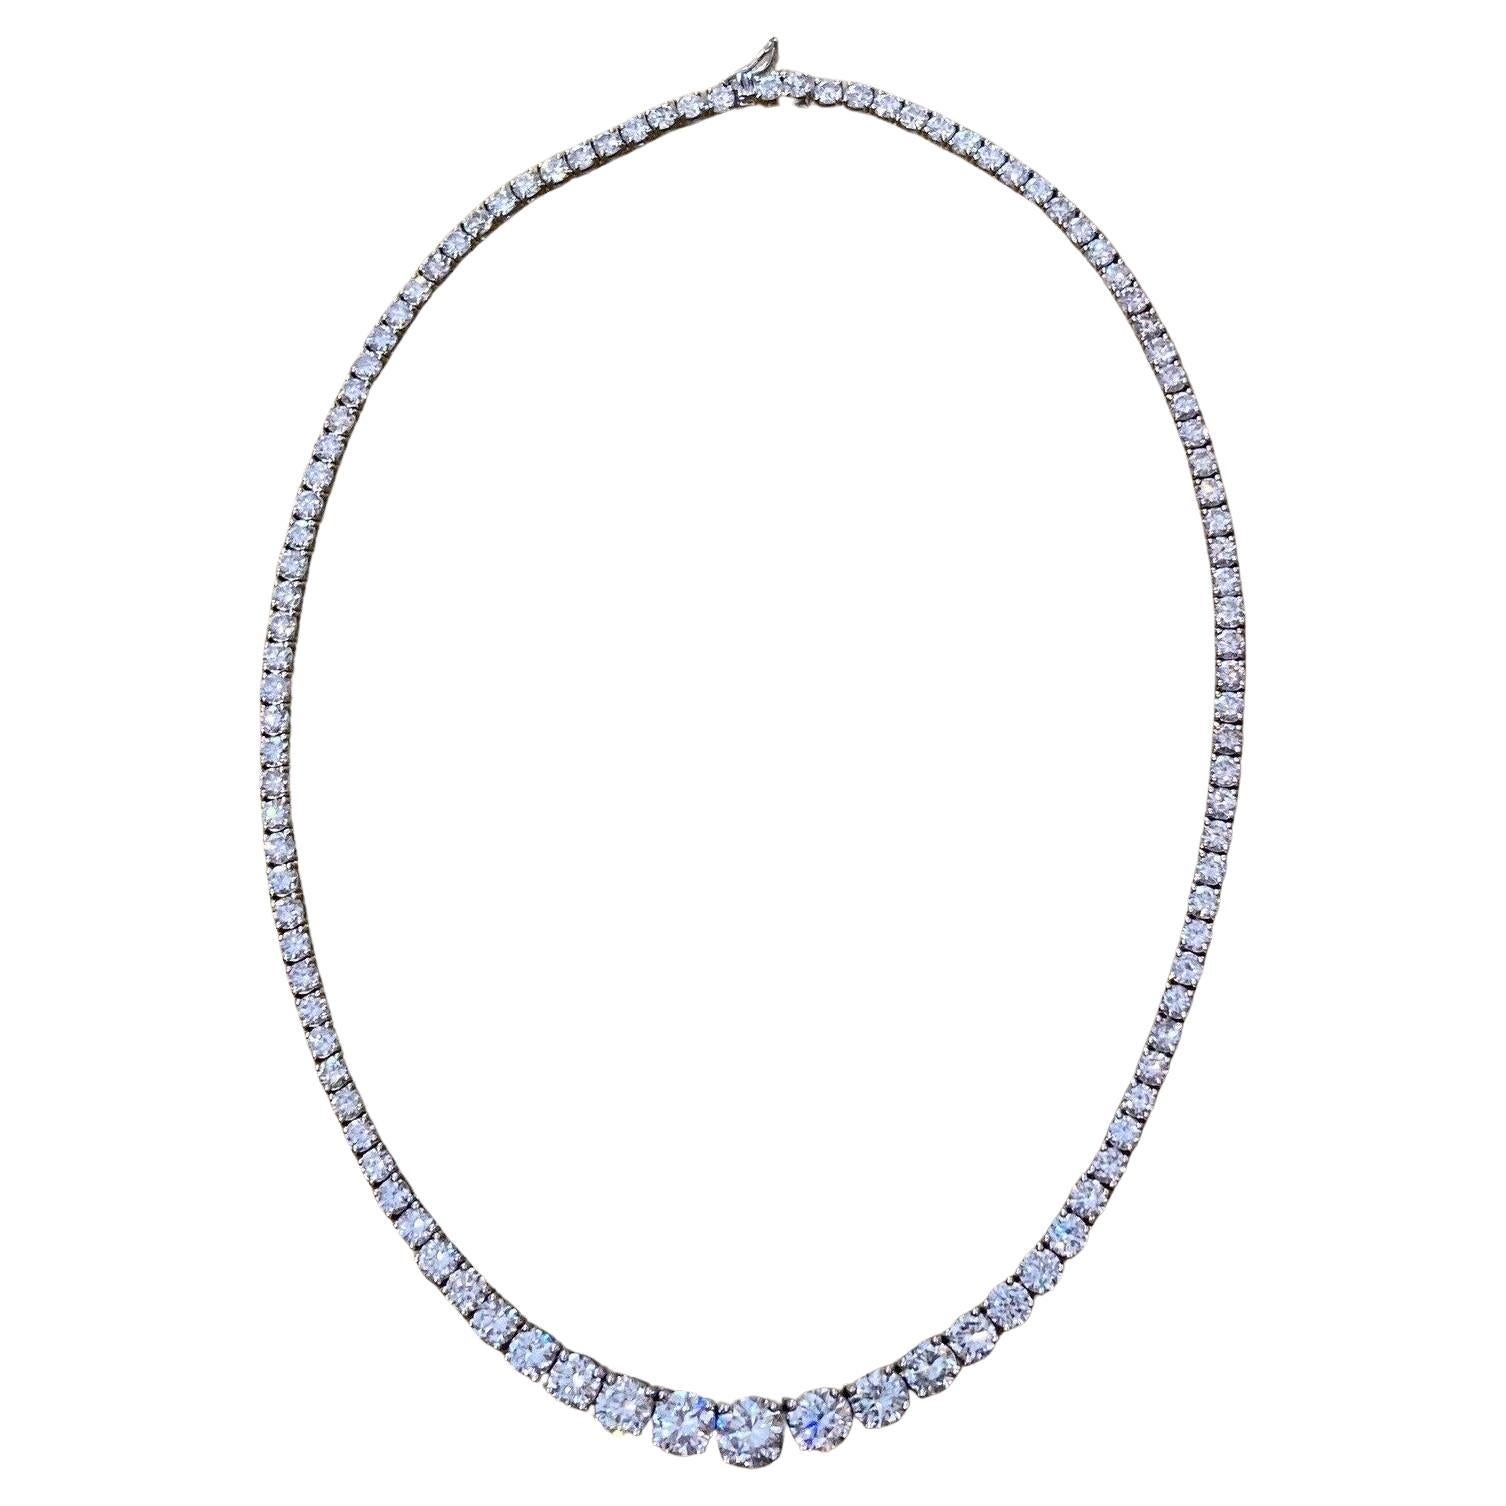 Diamond Riviera Necklace 24.12 Carat Total in 4-prong 18k White Gold setting For Sale